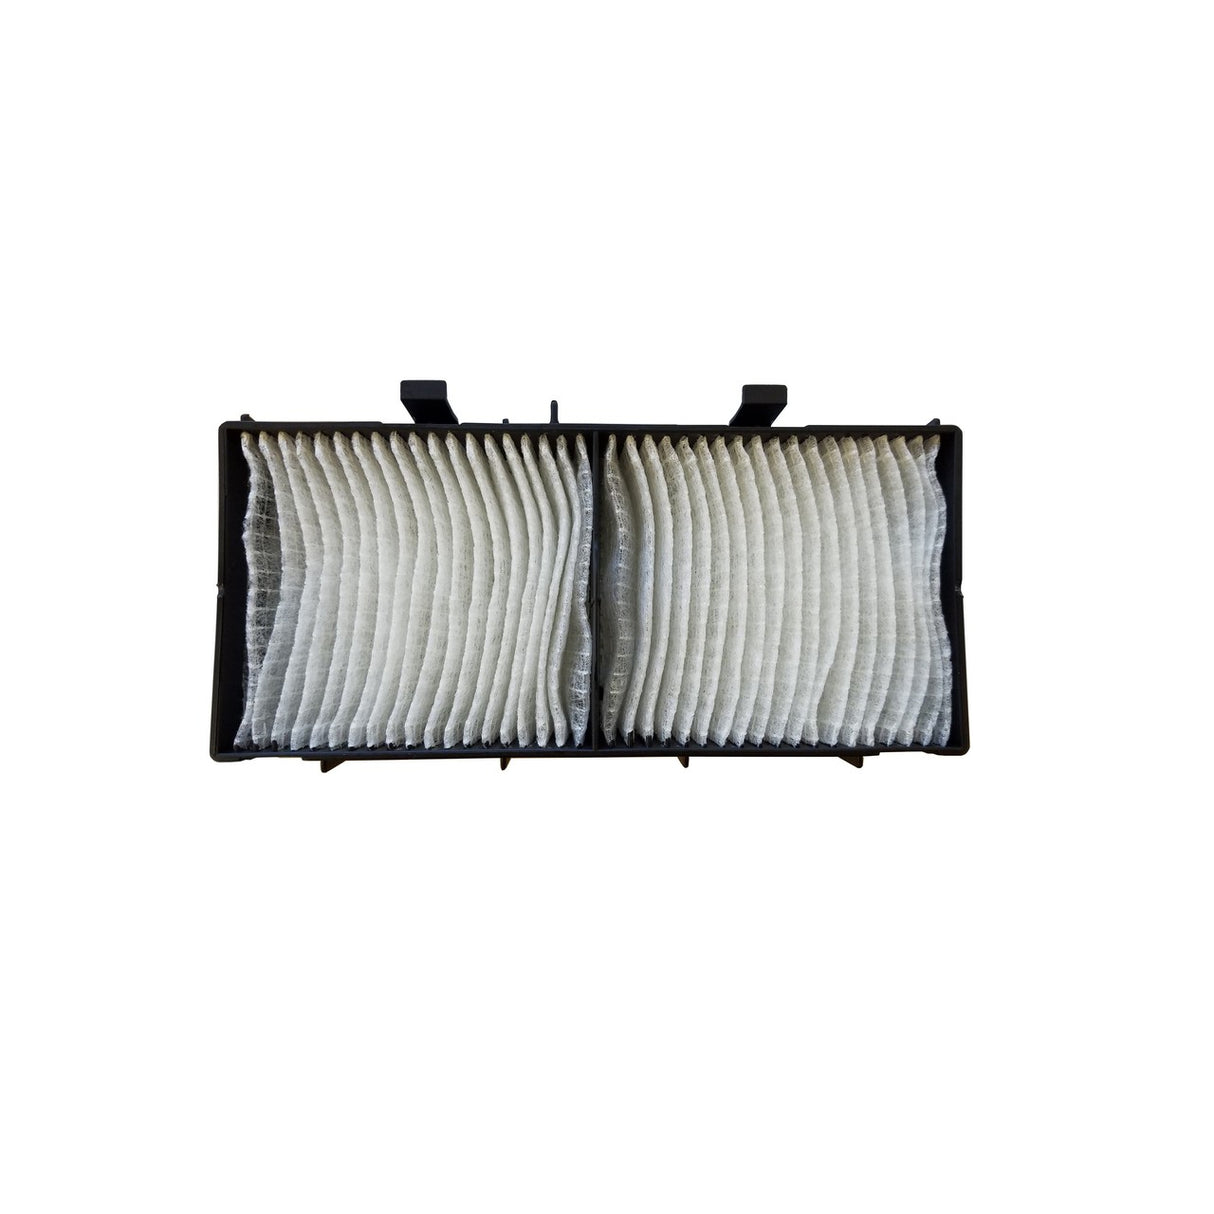 Hitachi UX38241 | Projector Air Filter for CPWU8450 CPWX8255 CPX8160